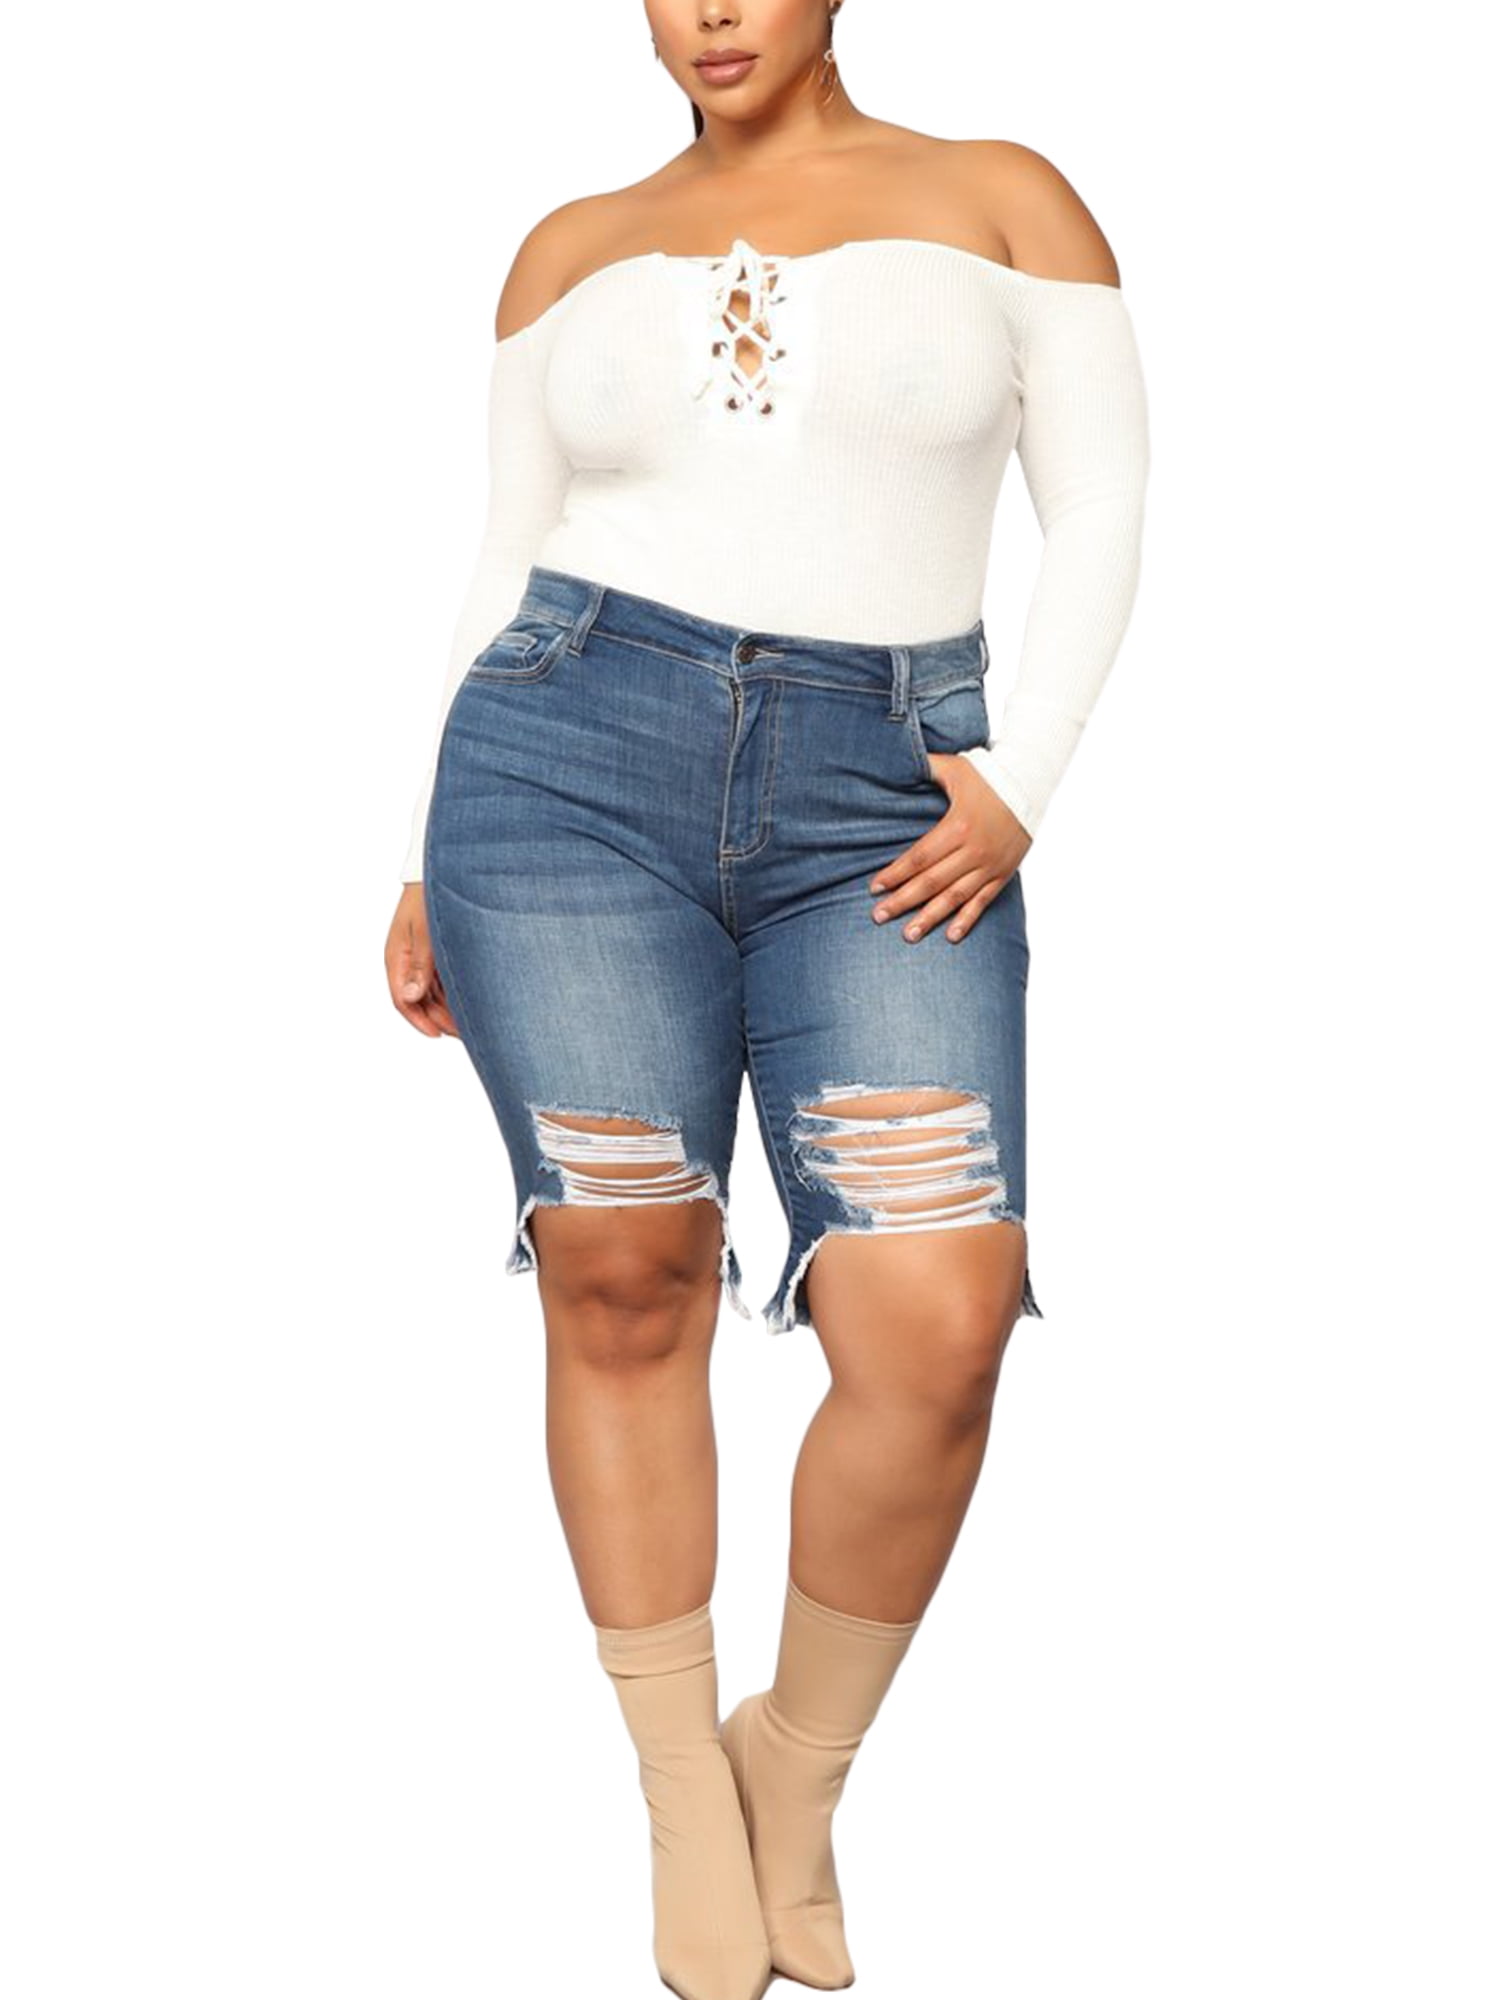 Get Wivvit Girls High Waisted Button Denim Hotpants Summer Jeans Shorts Sizes from 9 to 15 Years